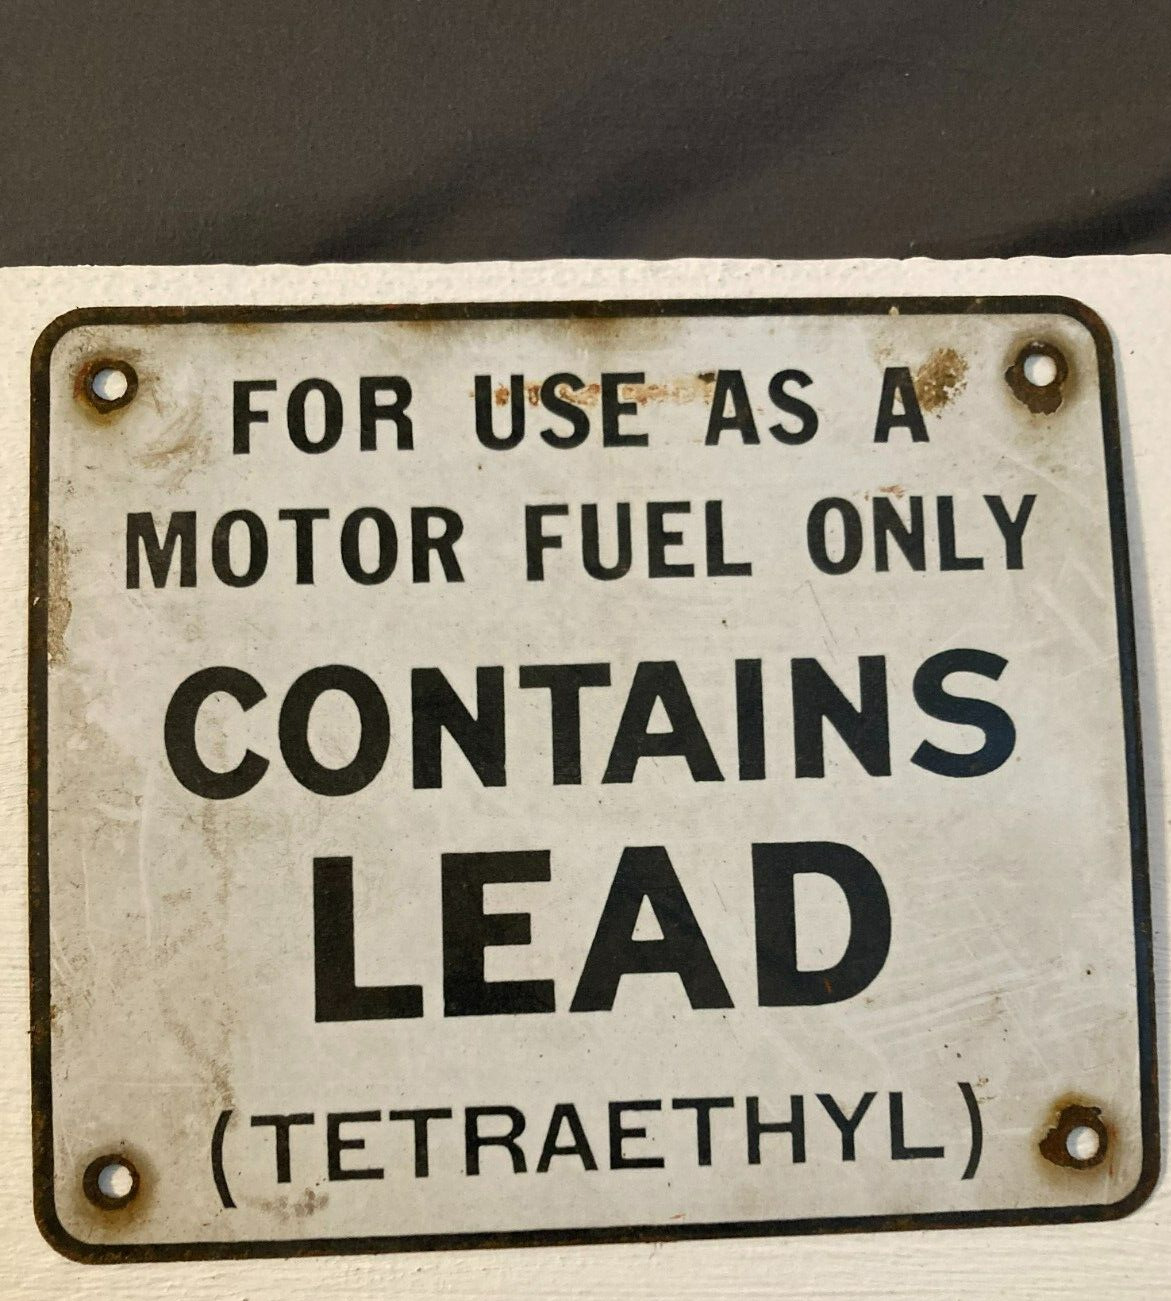 Vintage For Use As A Motor Fuel Only Contains Lead Metal Sign (TETRAETHYL)